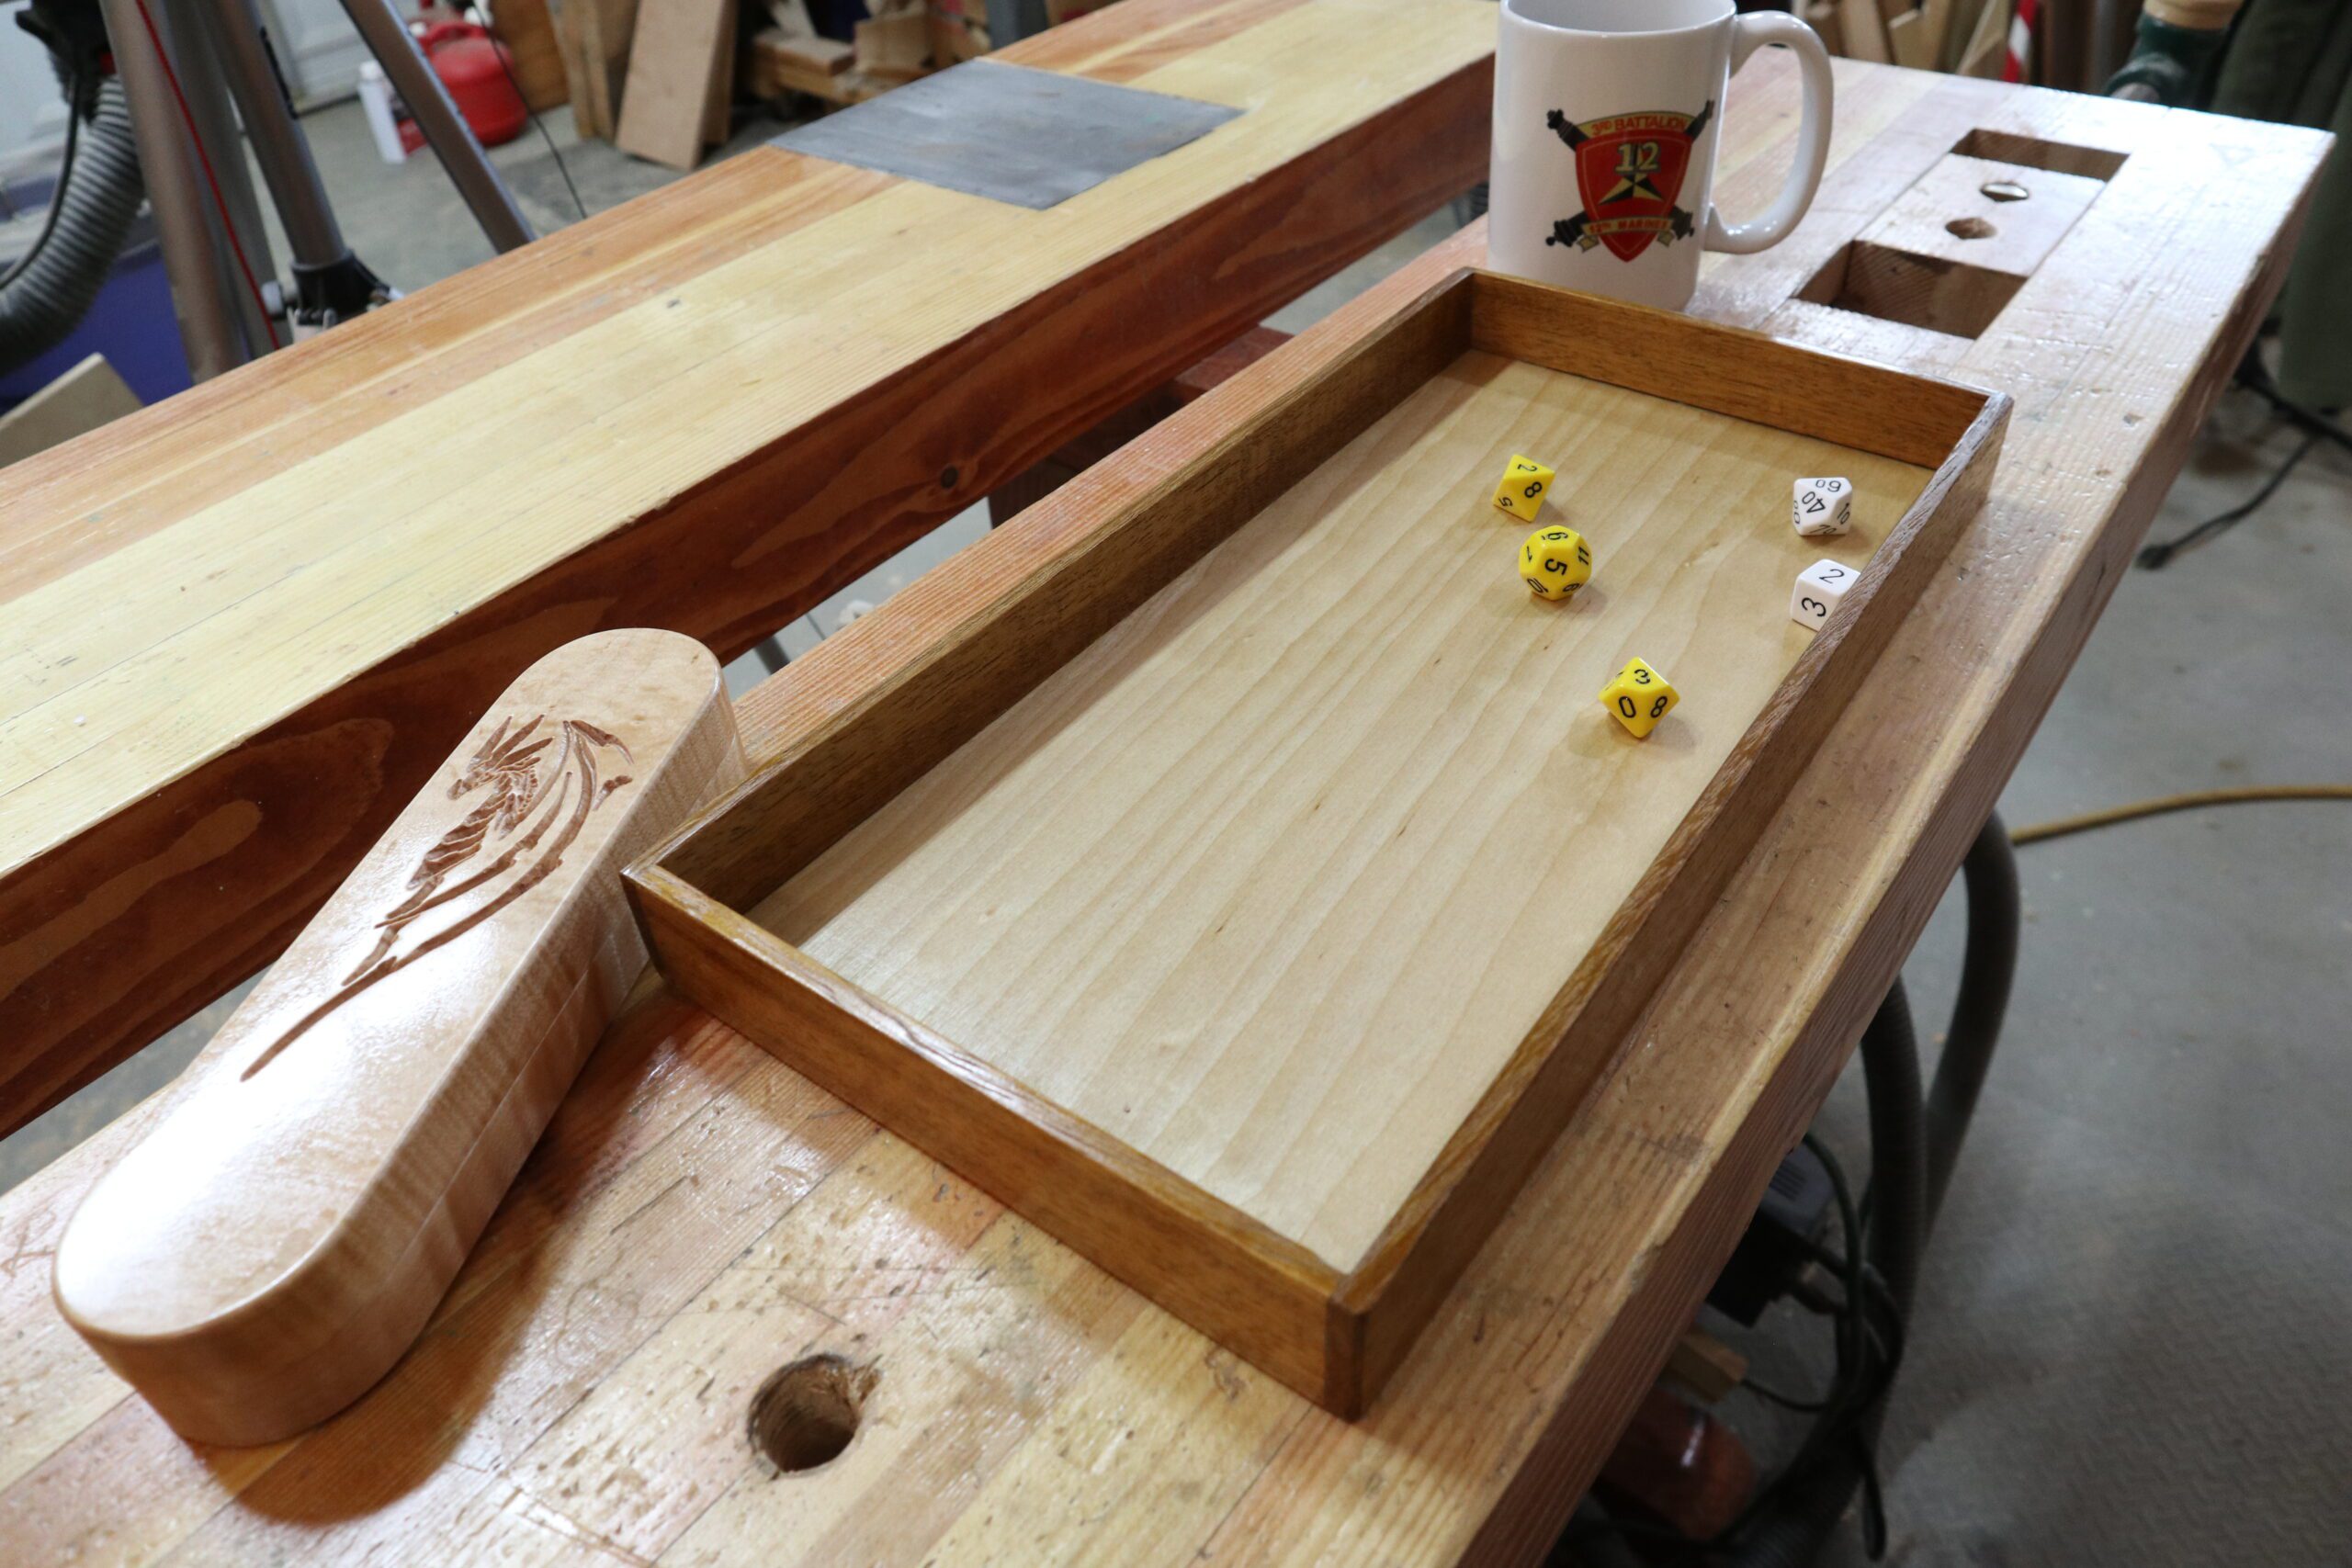 Completed Dice Tray